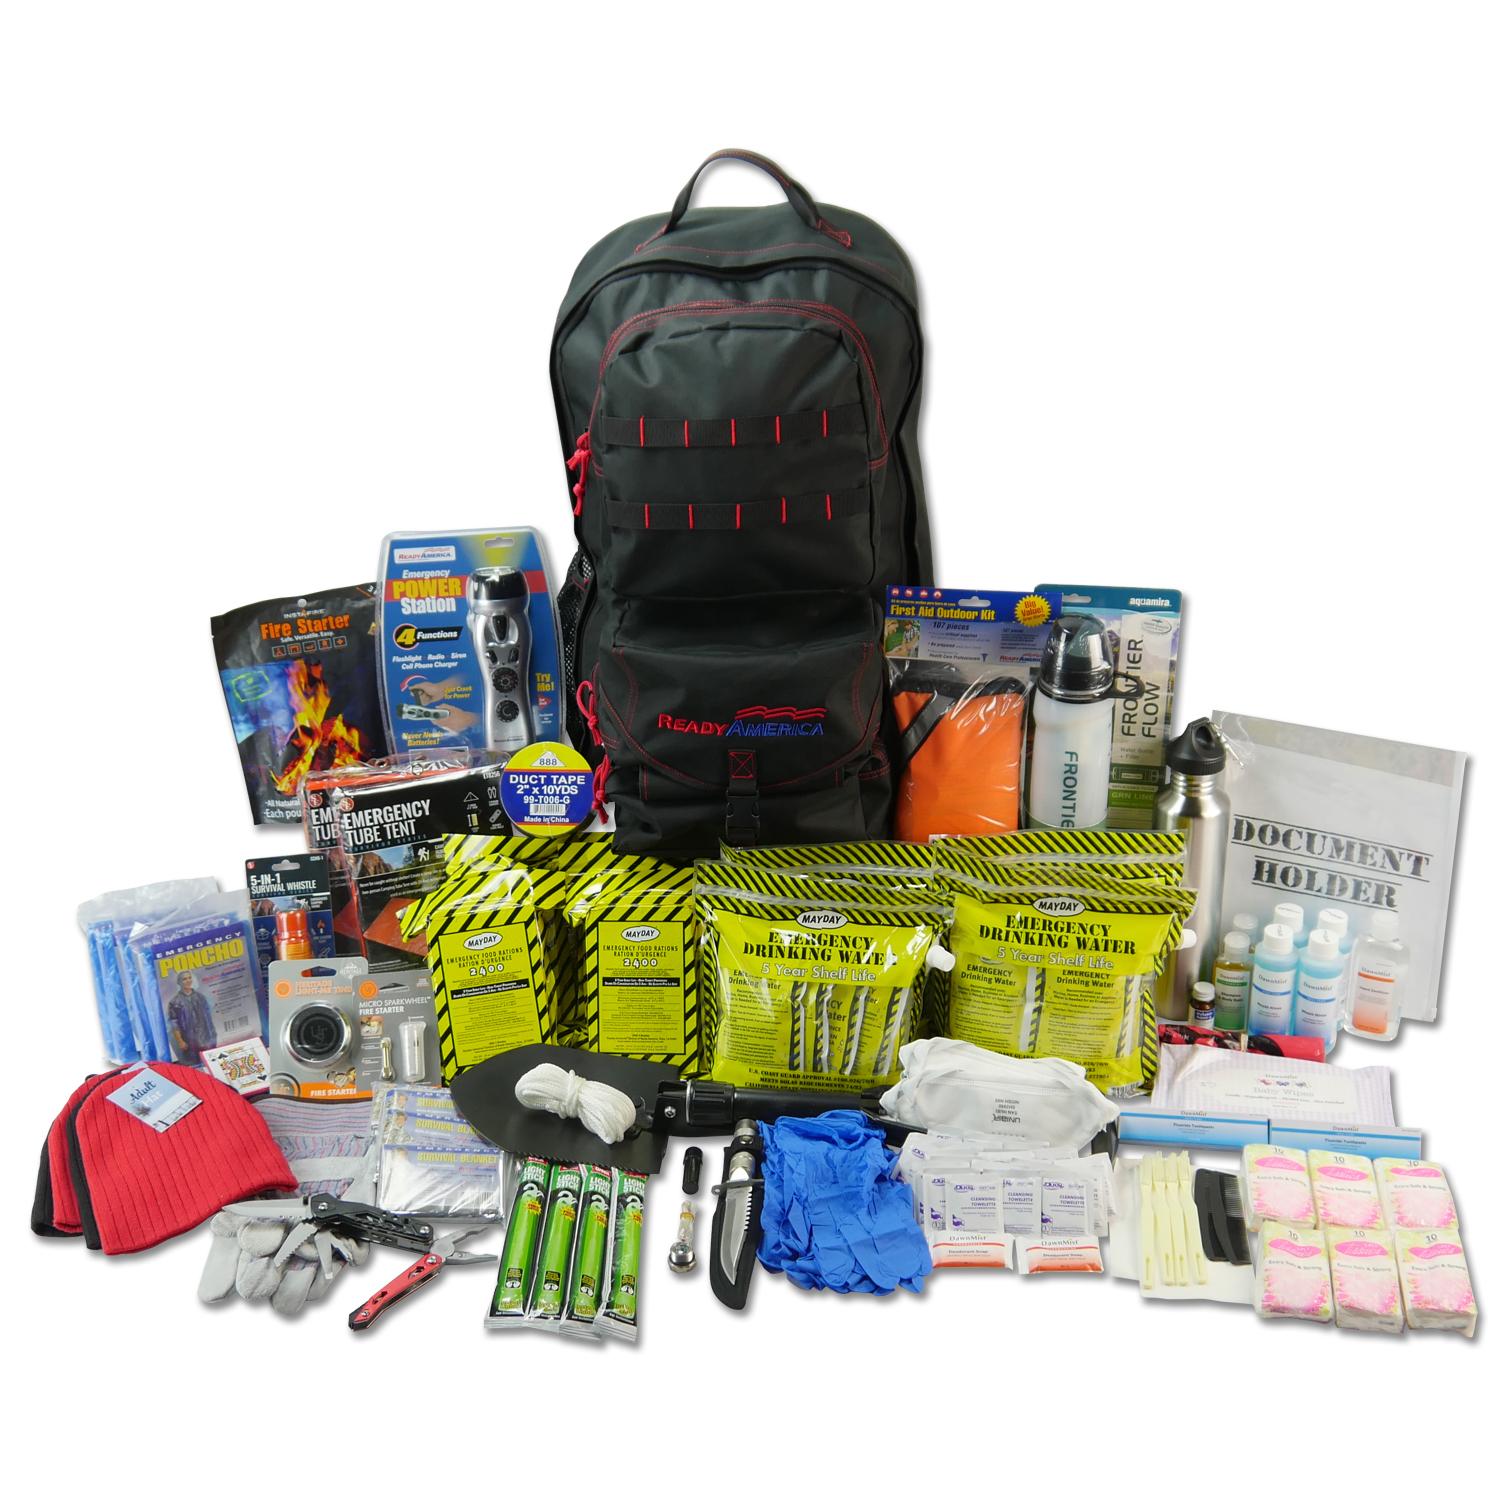 Emergency Kit Disaster Survival First Aid Kit Outdoor - China